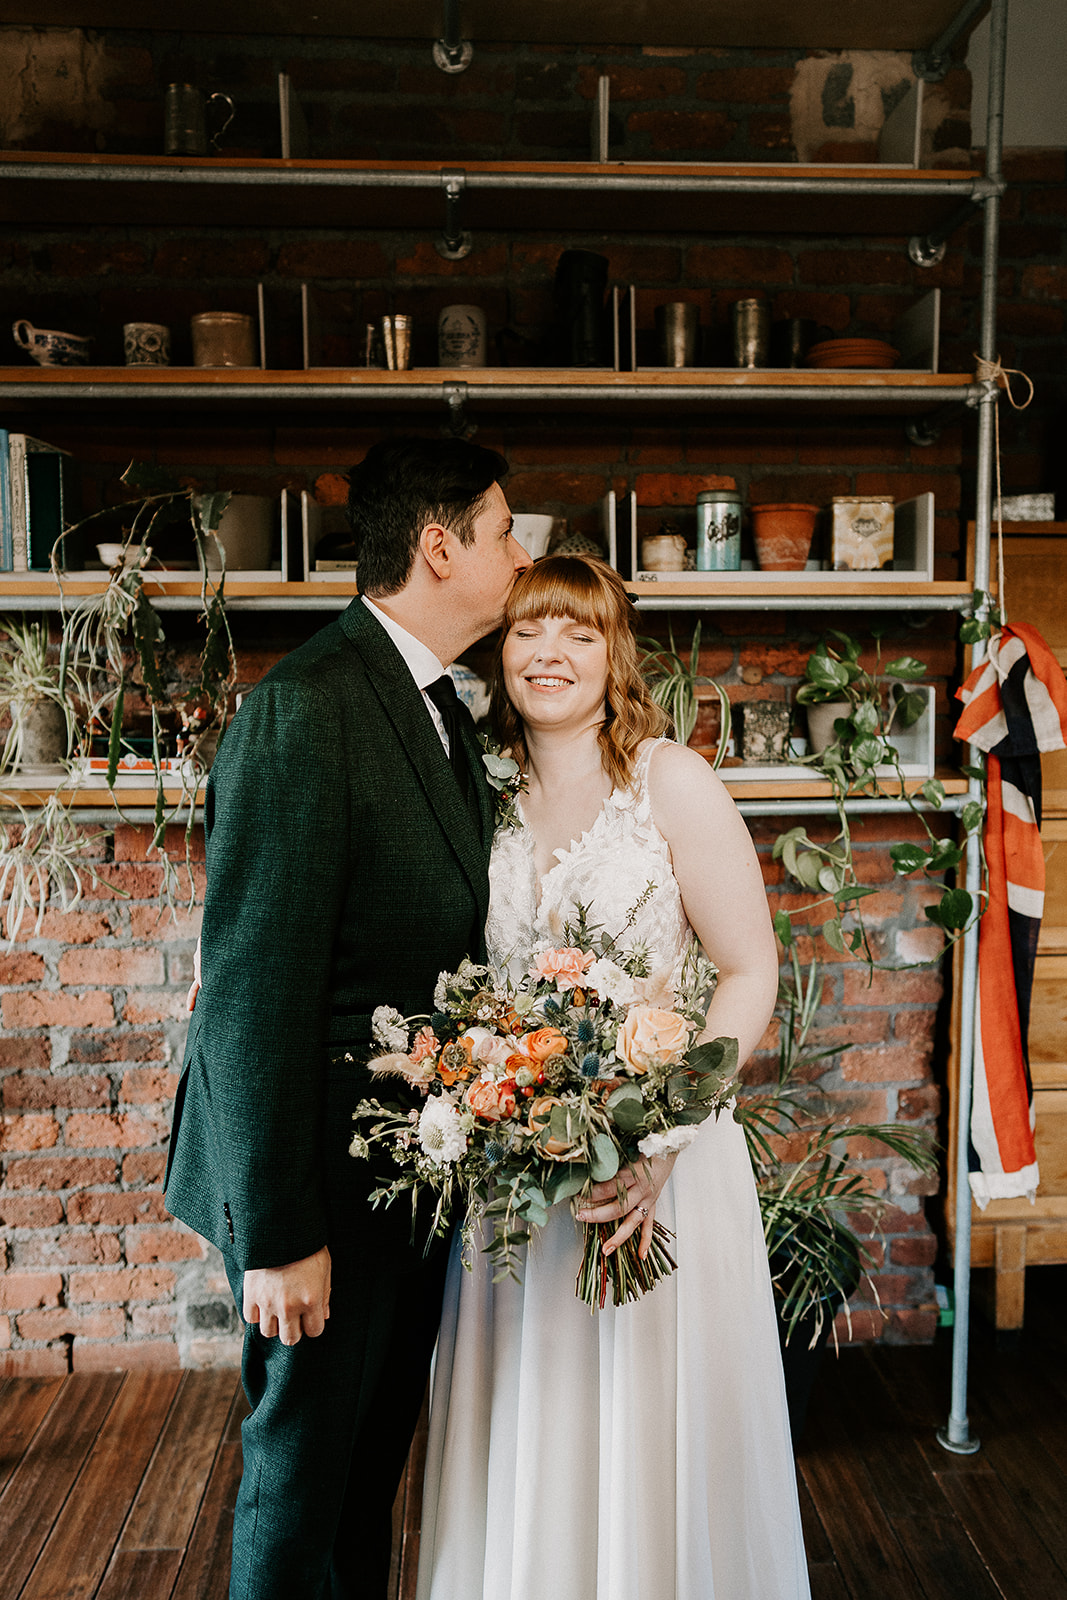 Relaxed Spring Wedding at The Chimney House & The Mowbray | Mirl & Co